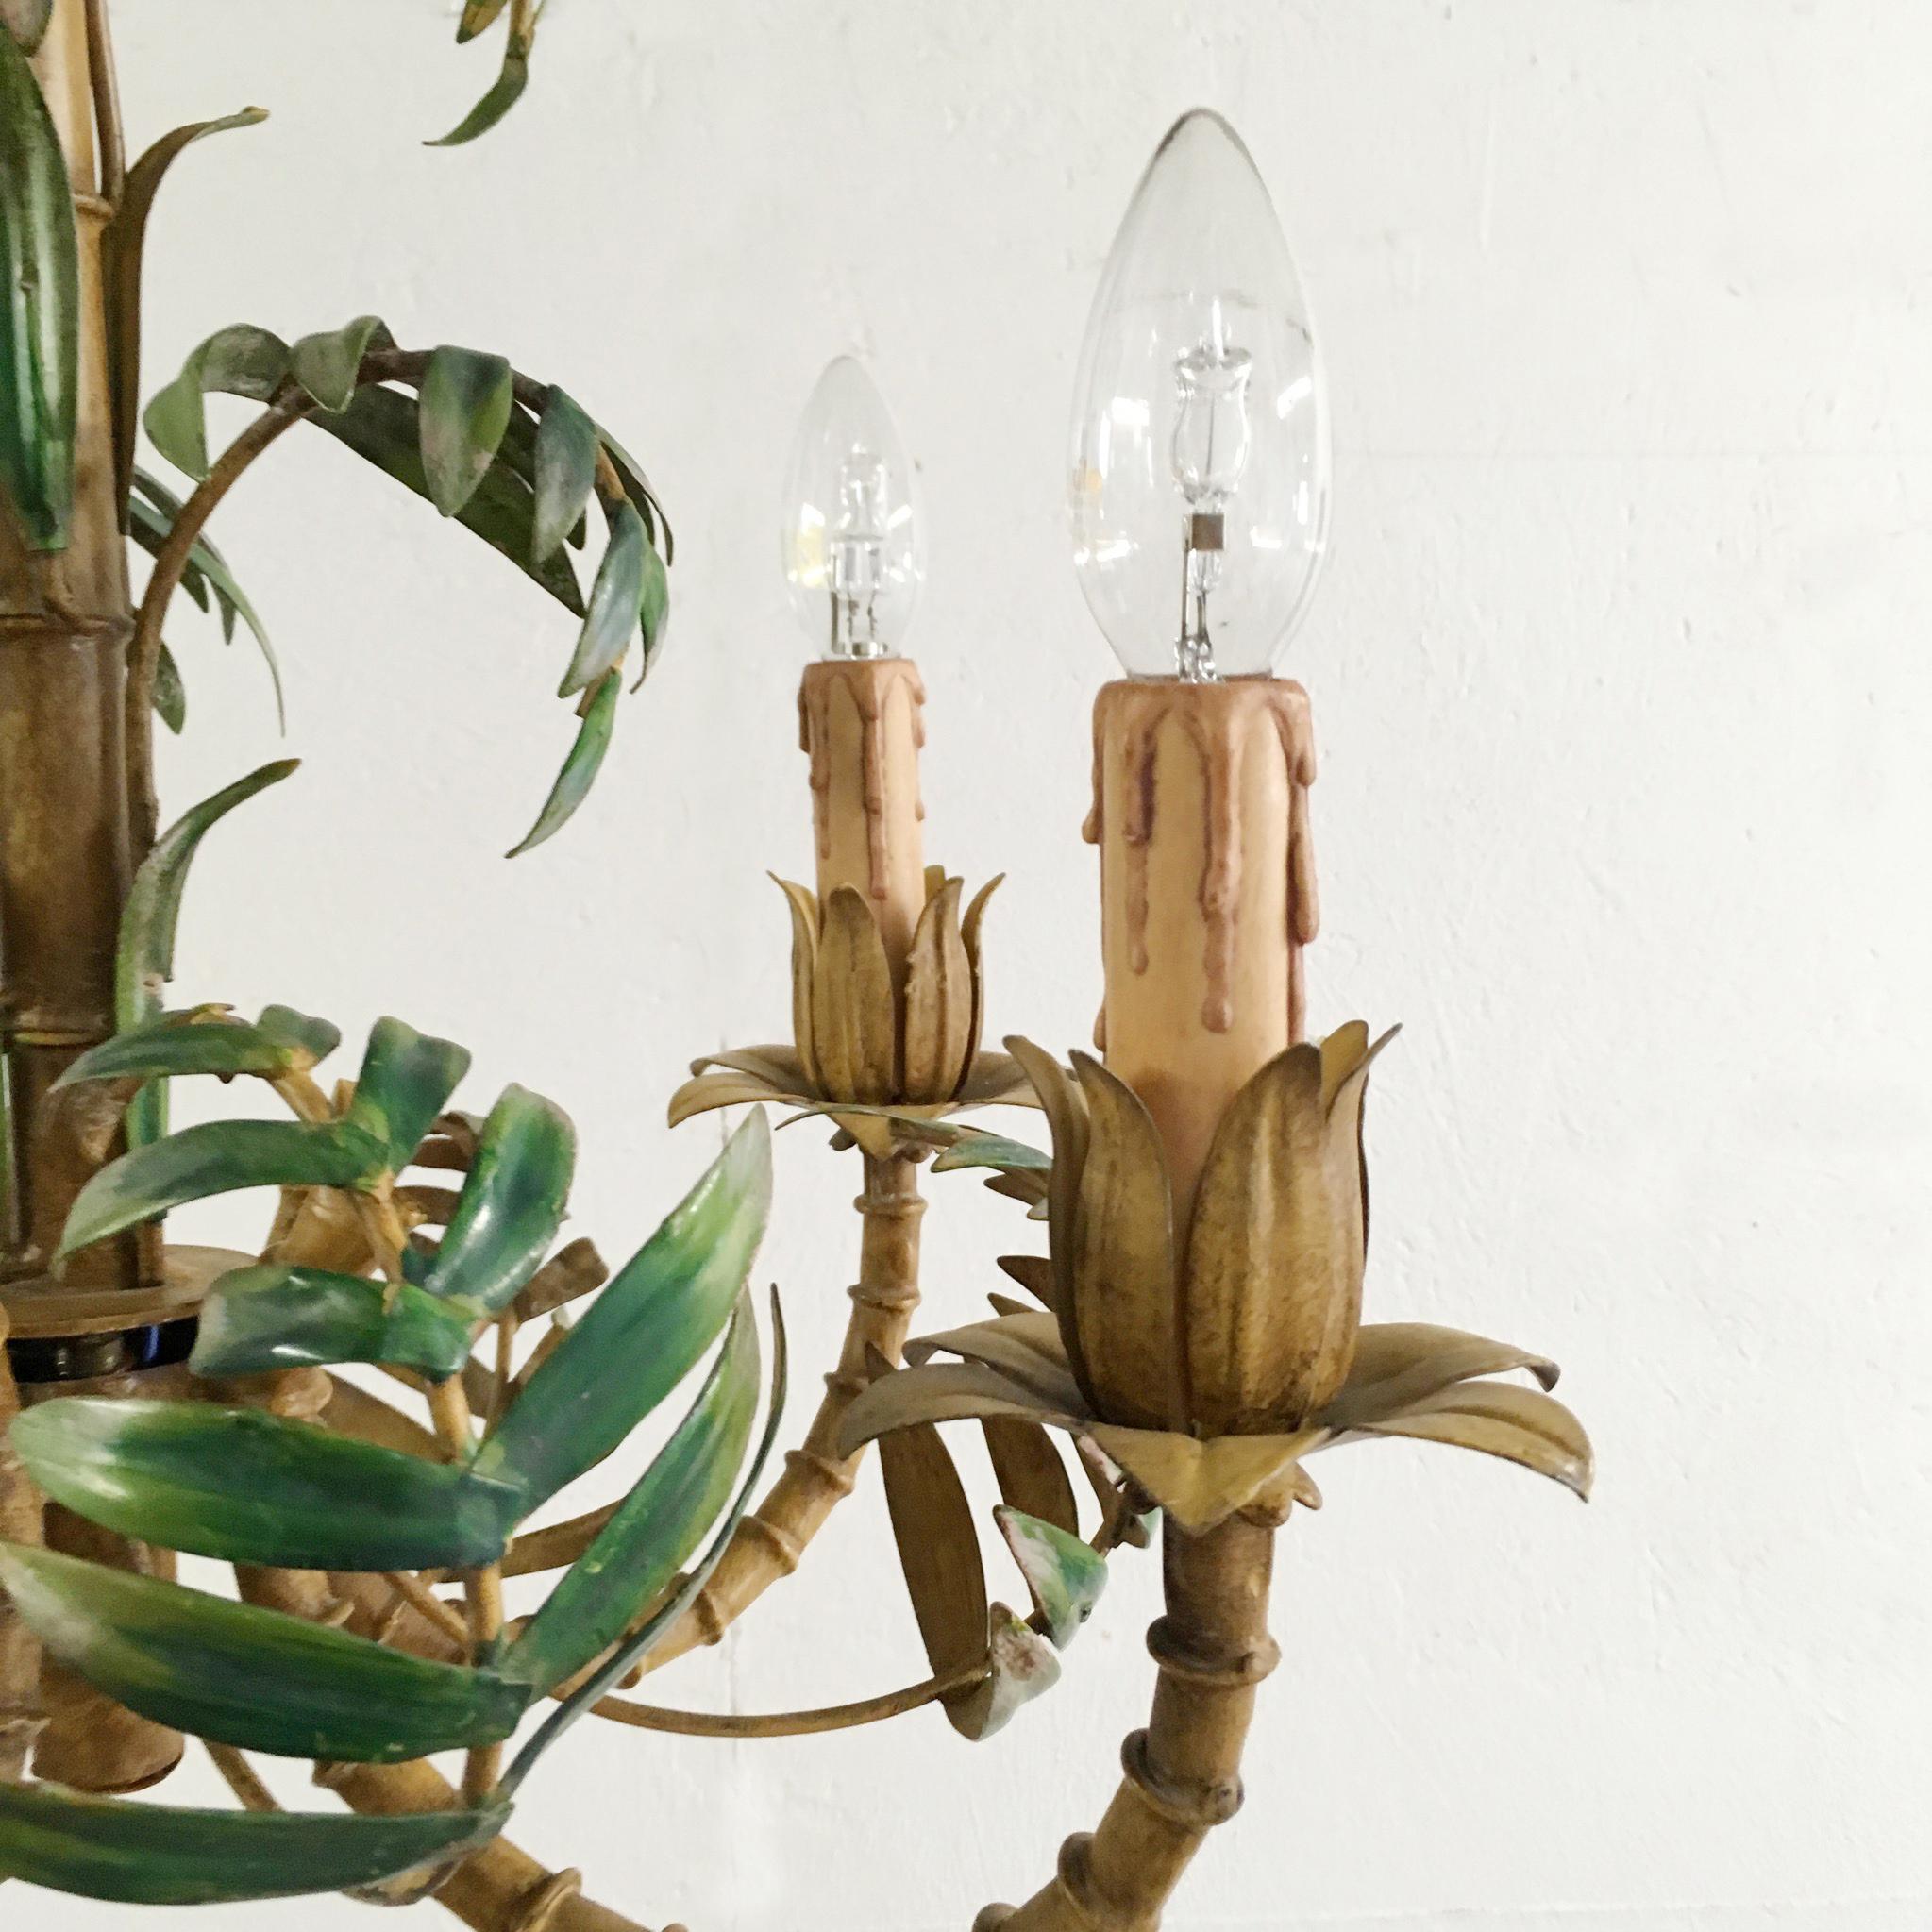 1950s faux bamboo Toleware chandelier
This is a rare and stunning light, metal faux bamboo and leaves
Faux bamboo design with 5 bamboo arms and many bamboo leaves surrounding
The chandelier takes 5 bulbs e14
Italian
The light has been re-wired